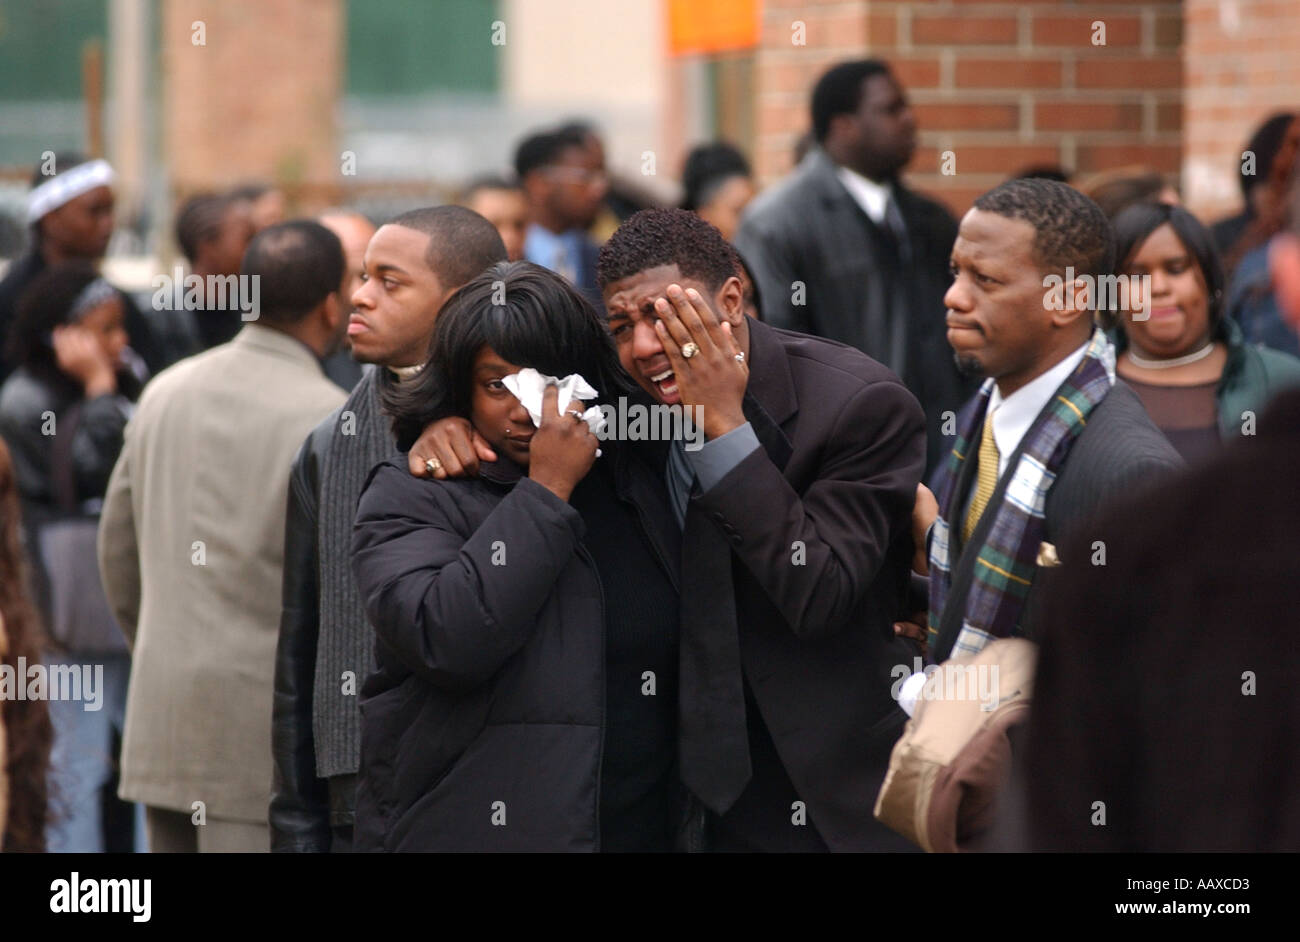 People leave a funeral crying after a gun violence murder in the United States Stock Photo